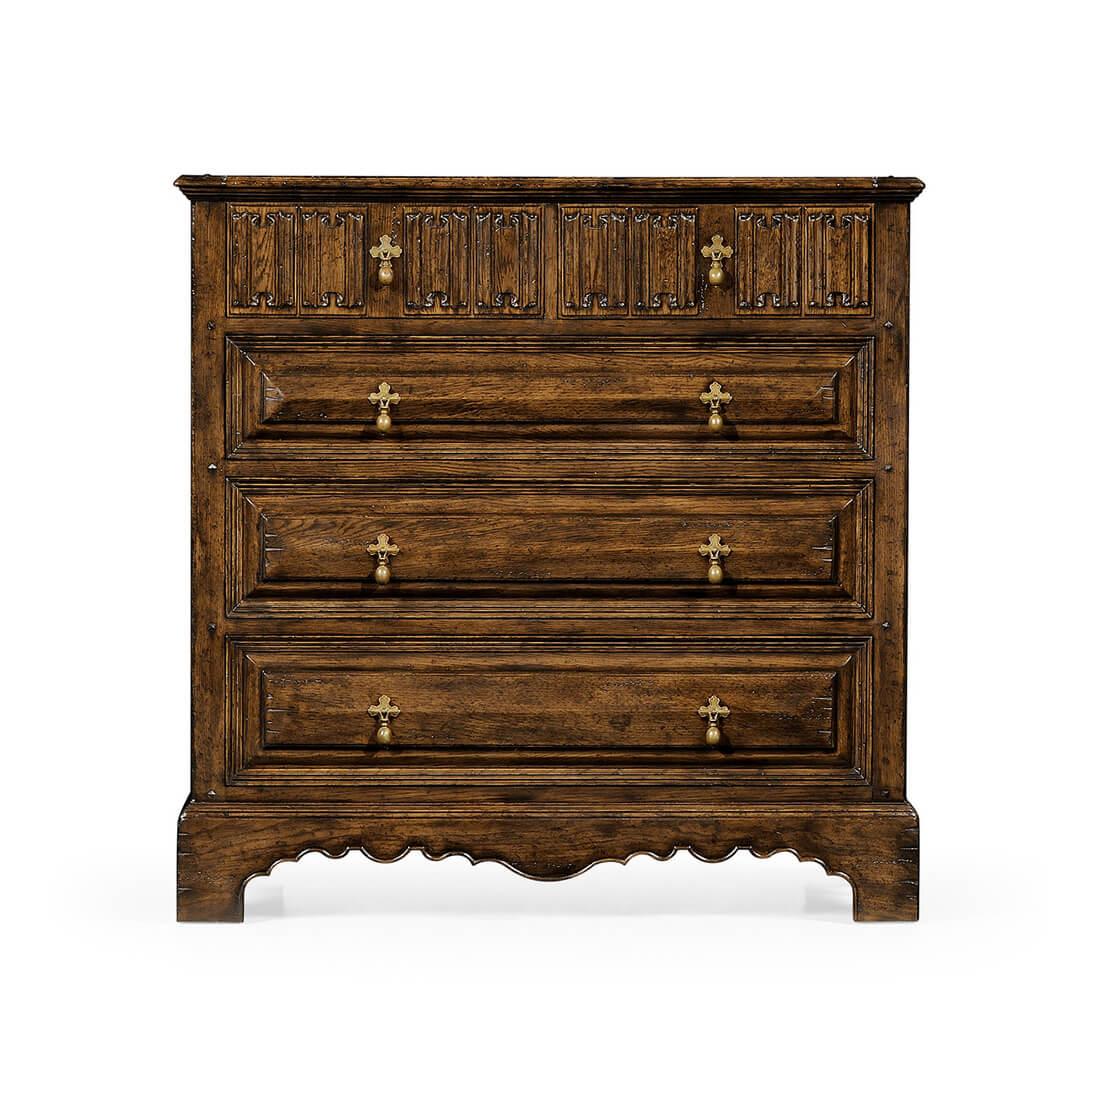 Pair of Dark brown oak heavily distressed chest of drawers with linenfold carved detail to the two top drawer fronts and stepped molding to the three graduated drawers. Patinated brass drop handles, the whole set on a shaped raised block foot